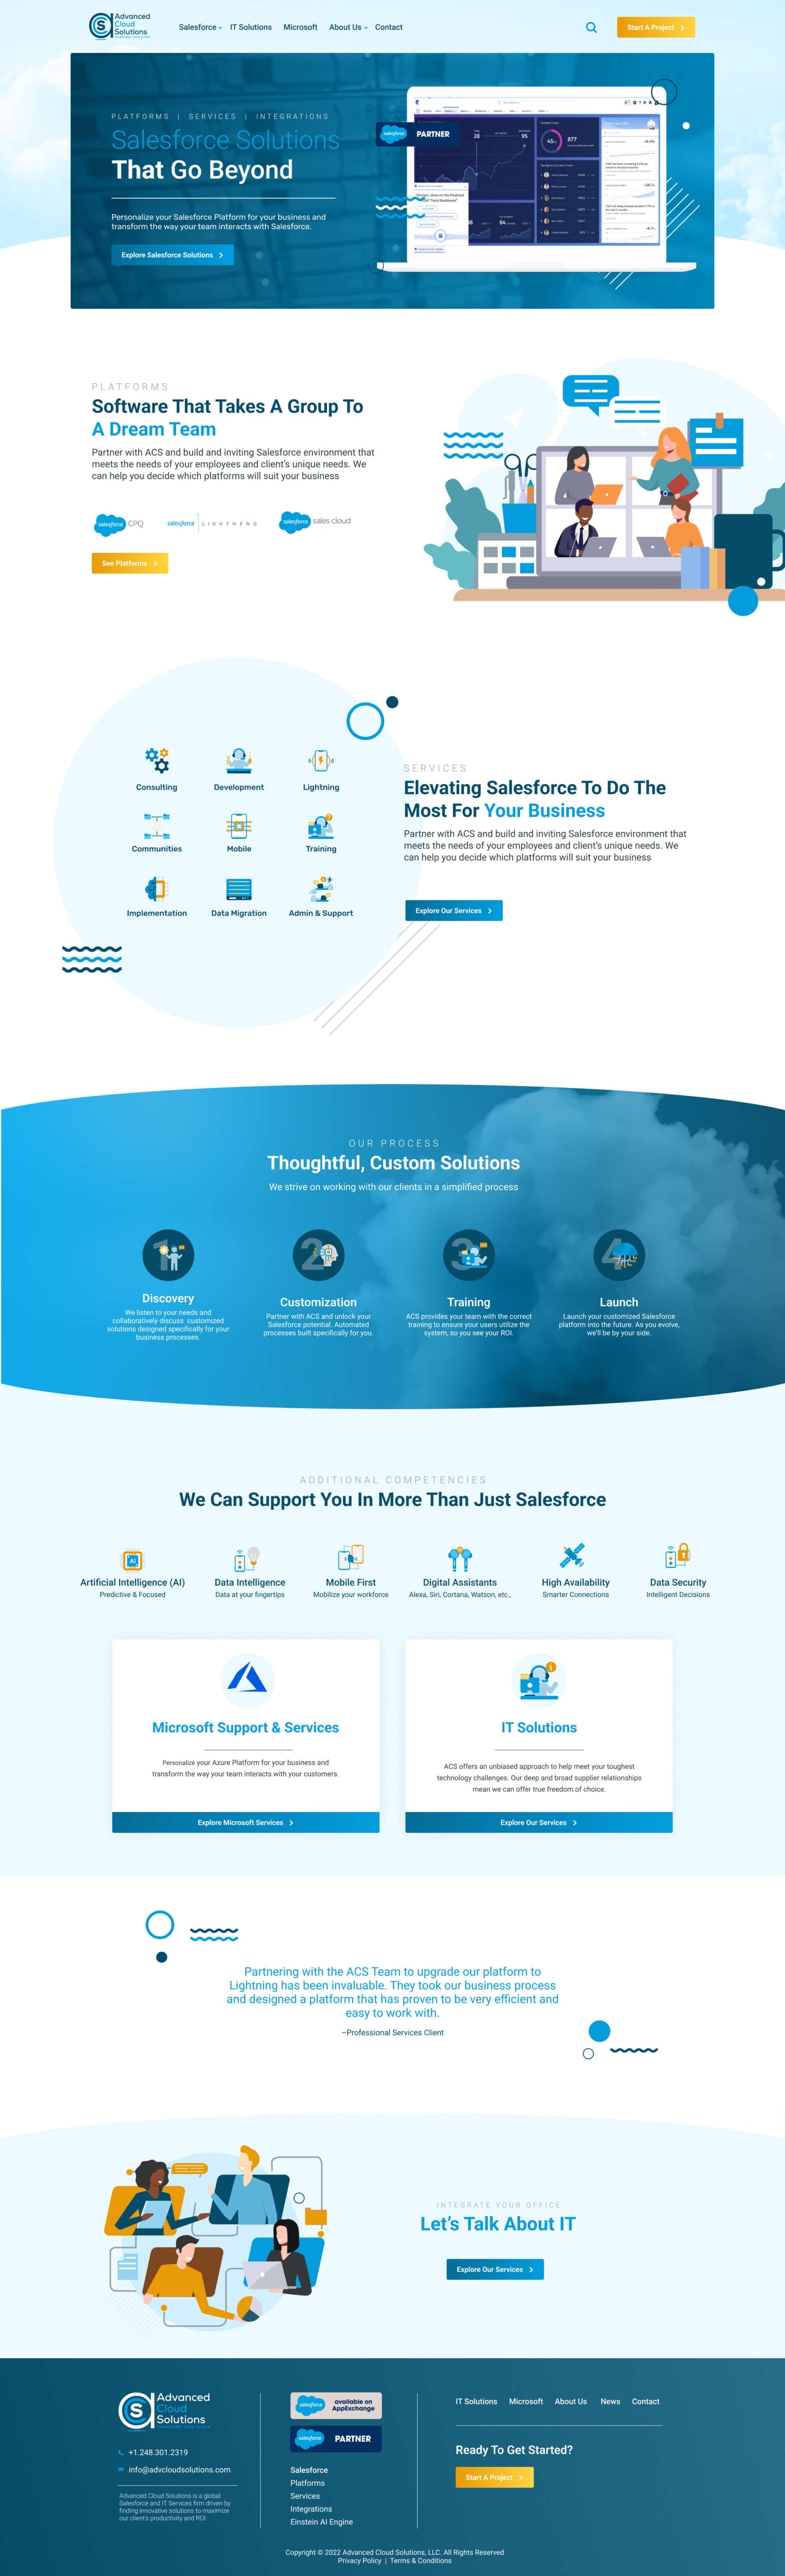 Full home page mockup of Advanced Cloud Solutions